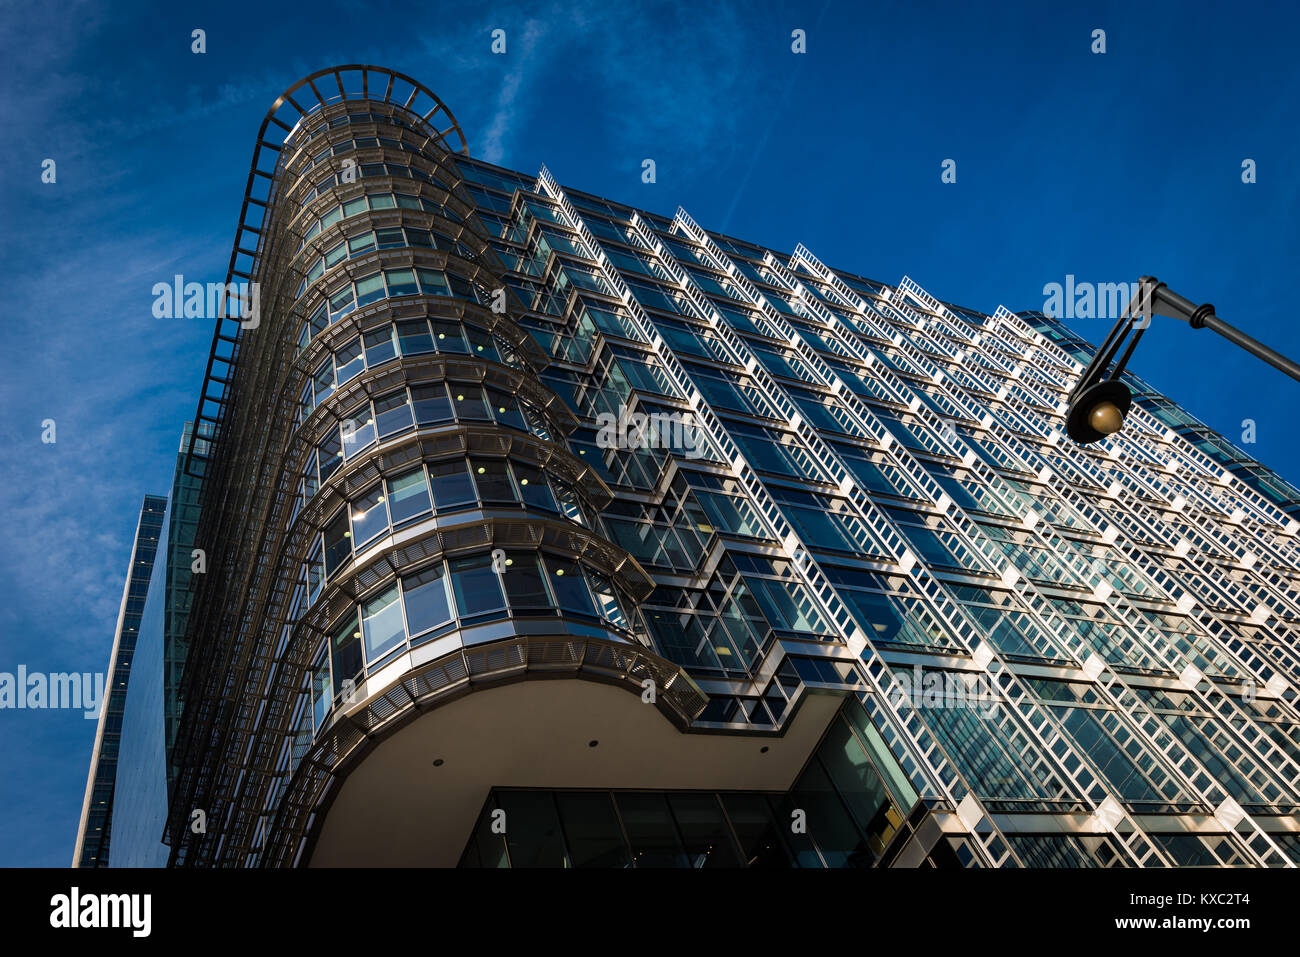 Office buildings in Canary Wharf, a major business district in London, United Kingdom Stock Photo